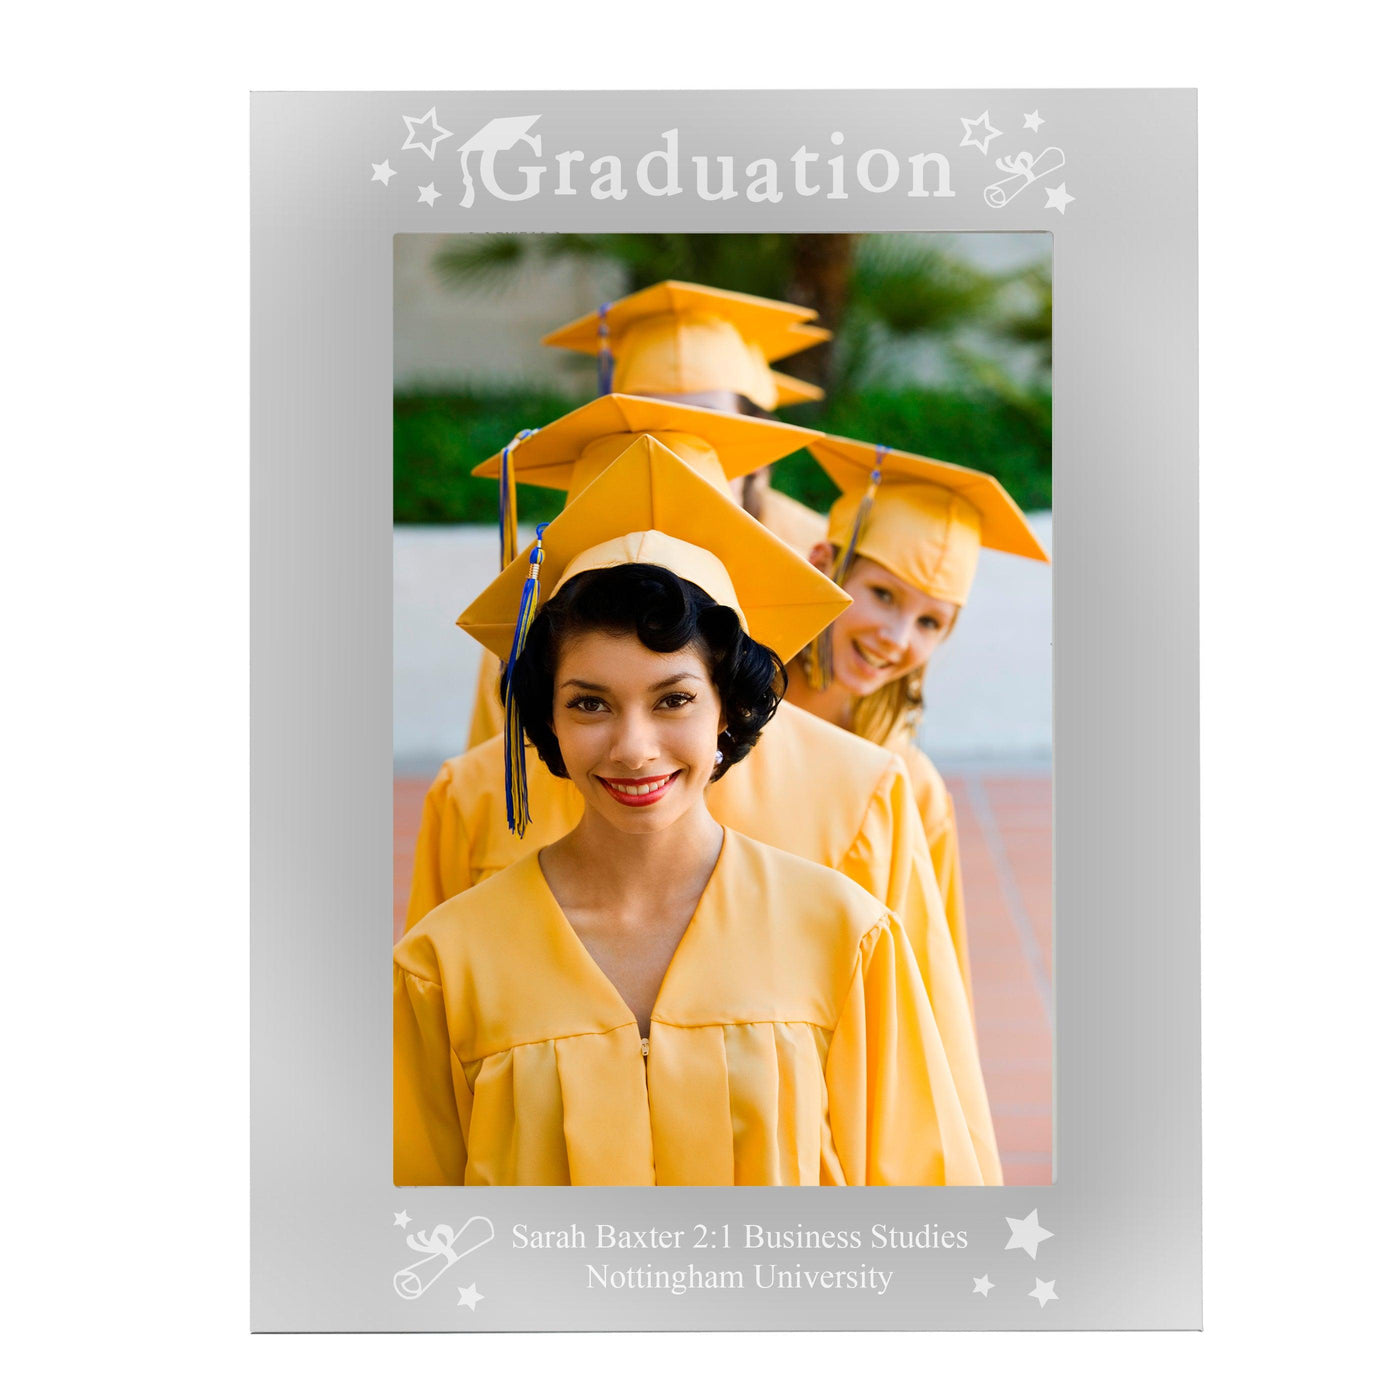 Personalised Graduation 5x7 Silver Photo Frame - Shop Personalised Gifts